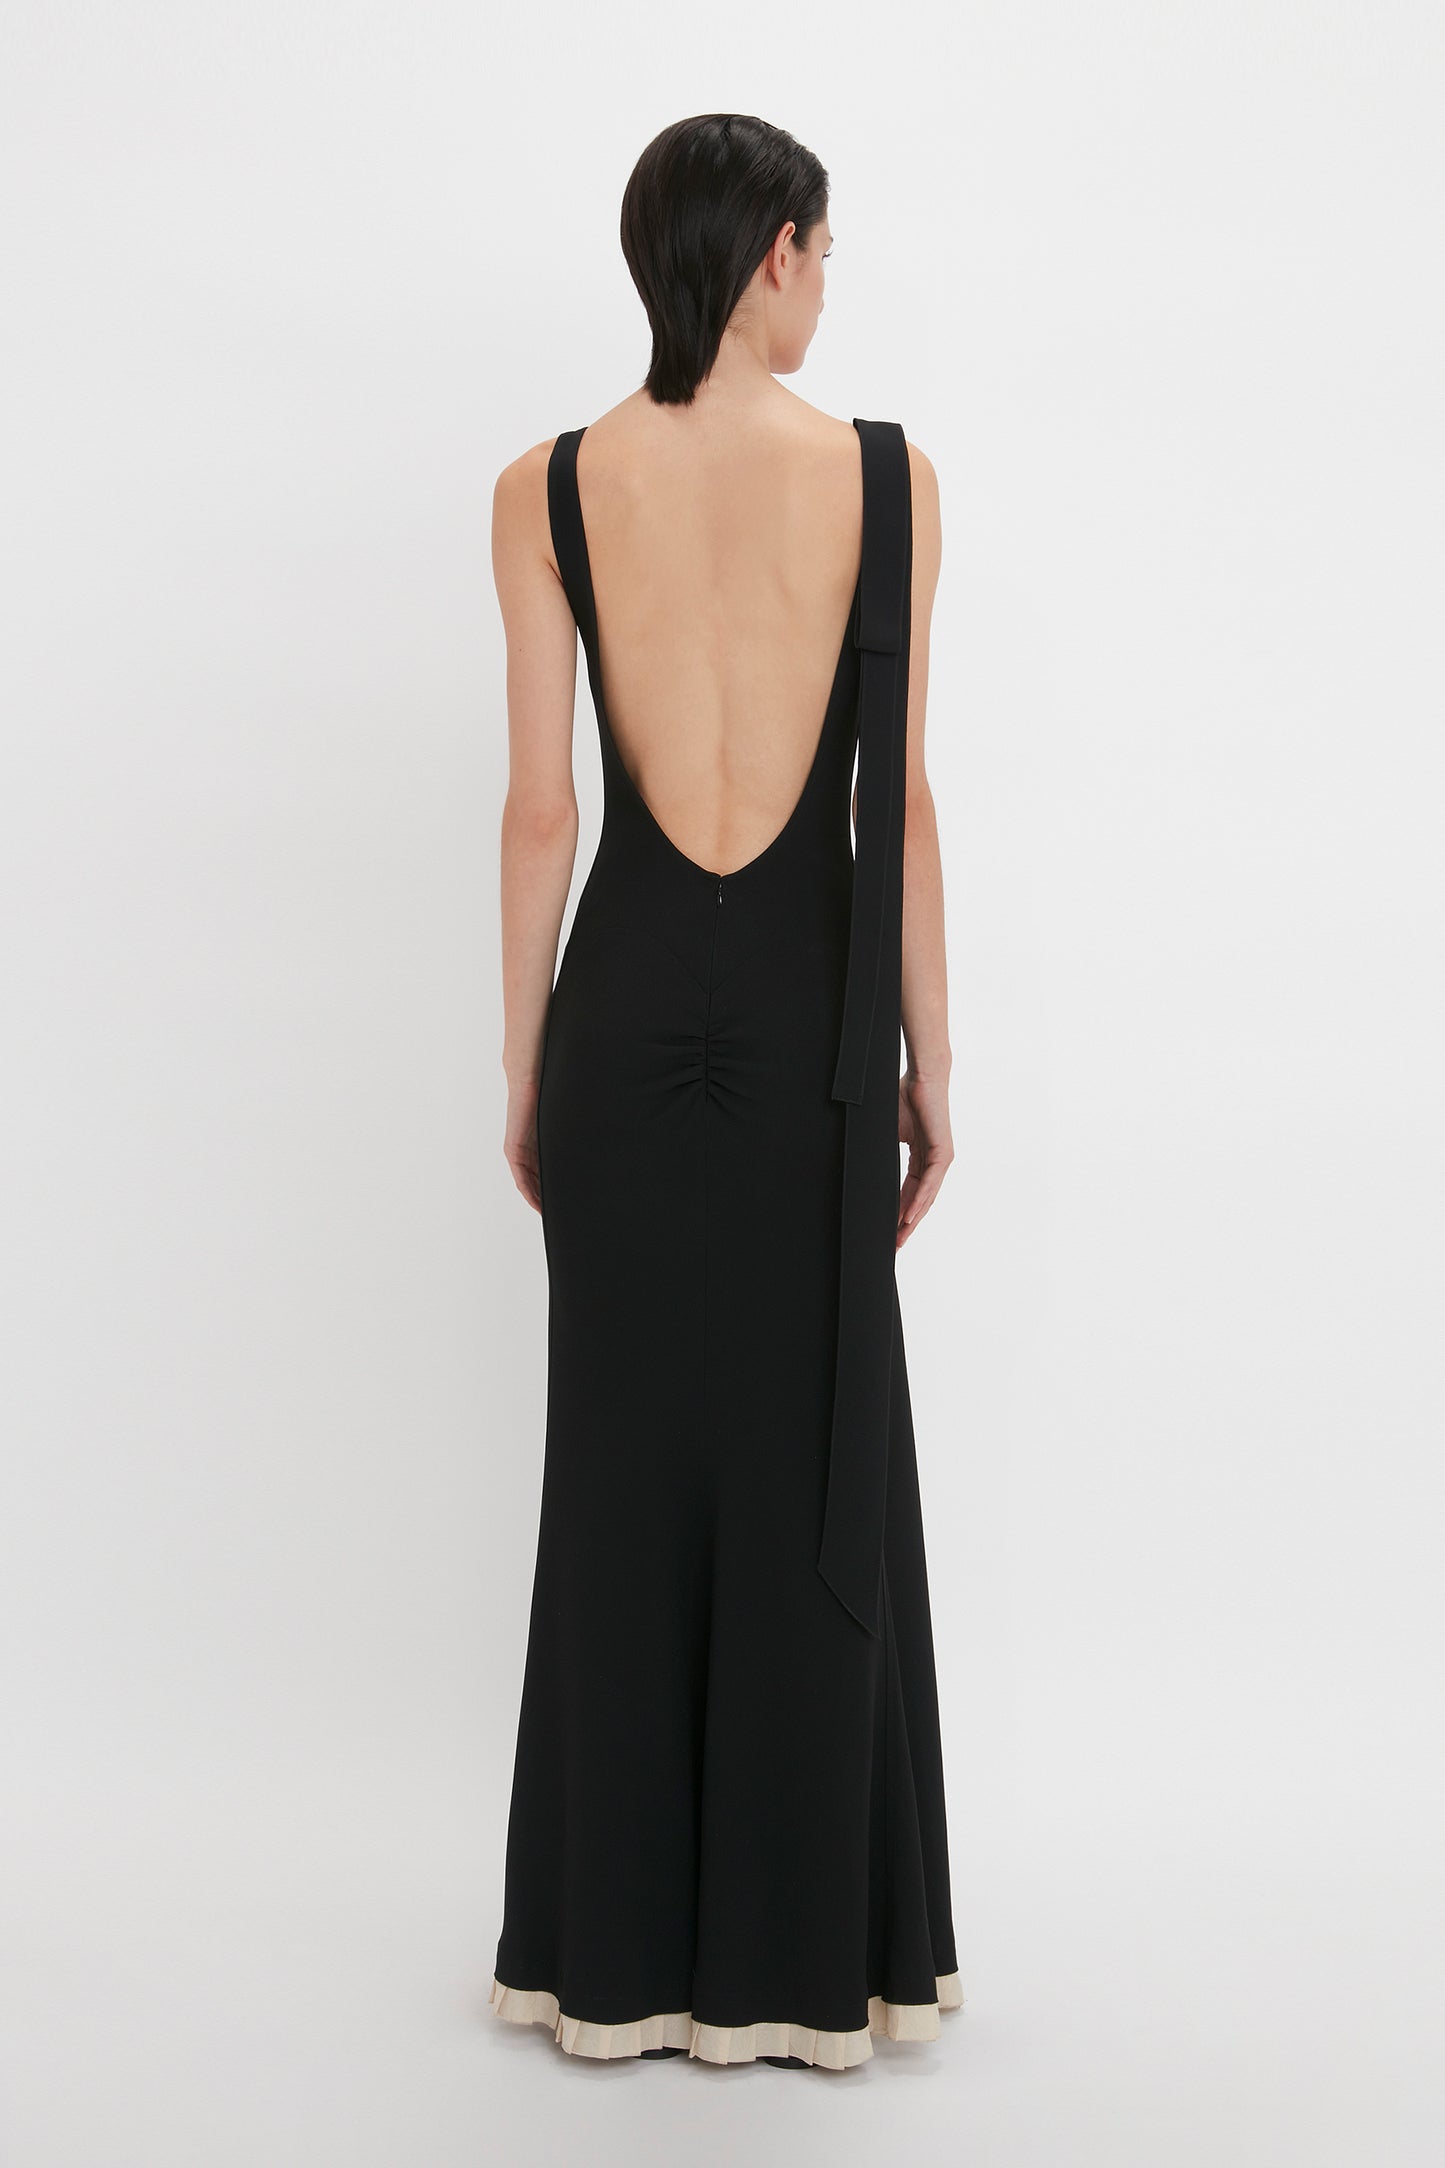 Person wearing a black, backless V-Neck Gathered Waist Floor-Length Gown In Black by Victoria Beckham with white trim at the hem, featuring a deep-V neckline and a flattering silhouette, standing against a plain white background.